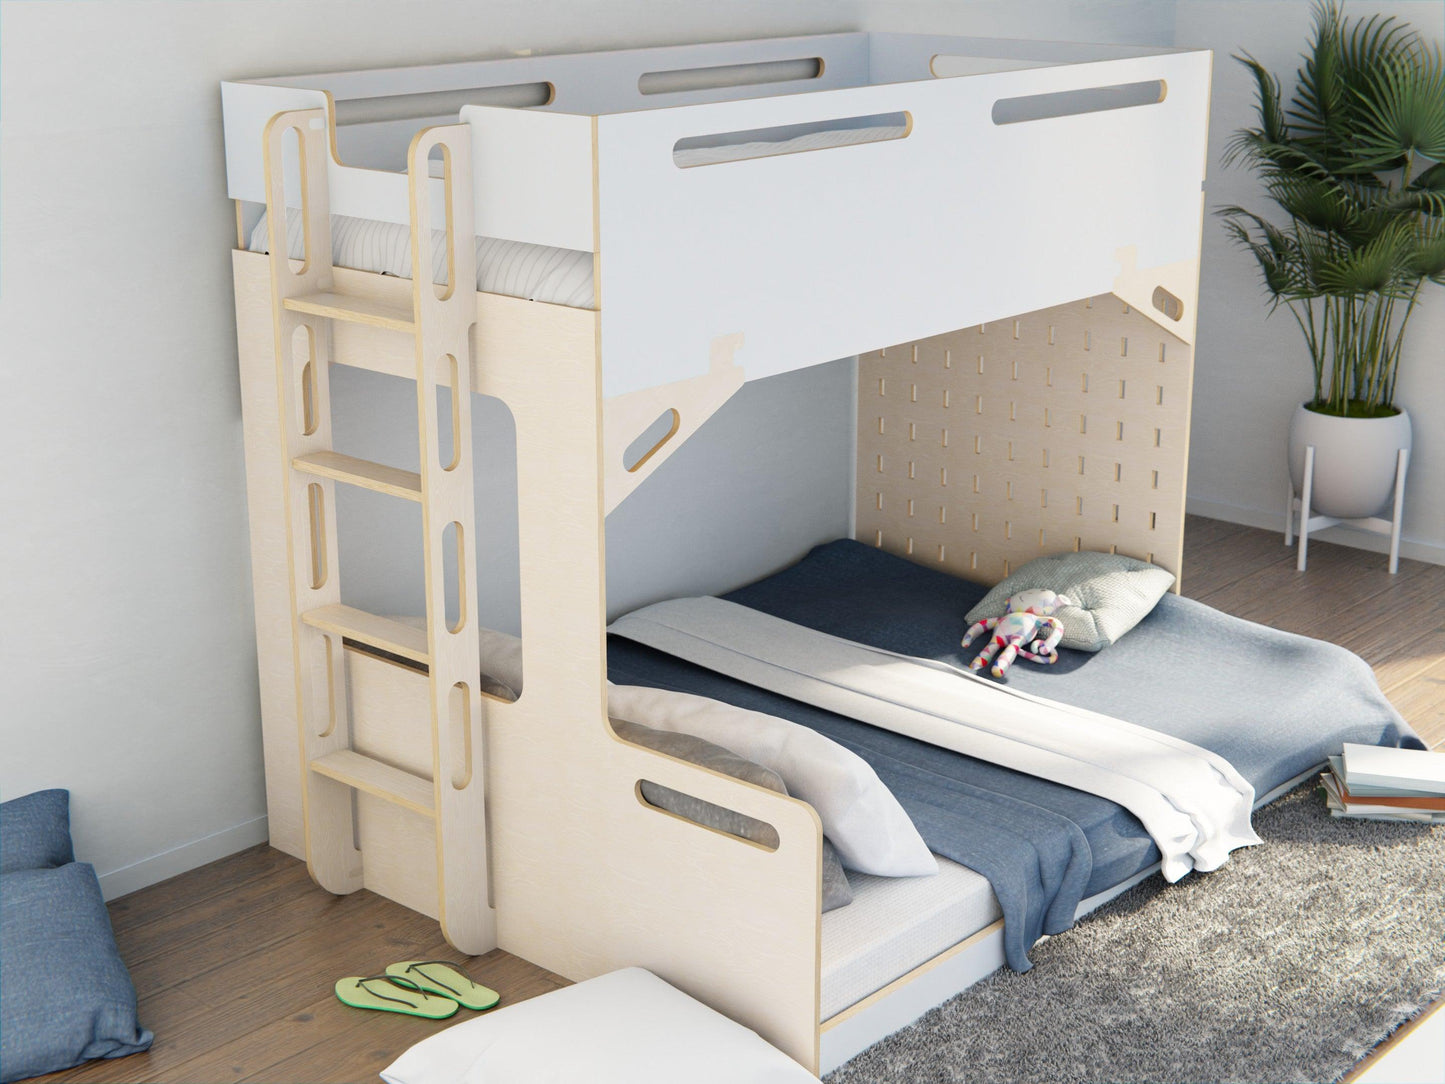 Transform your family's sleep with our triple bunk beds. Crafted from sturdy white plywood.